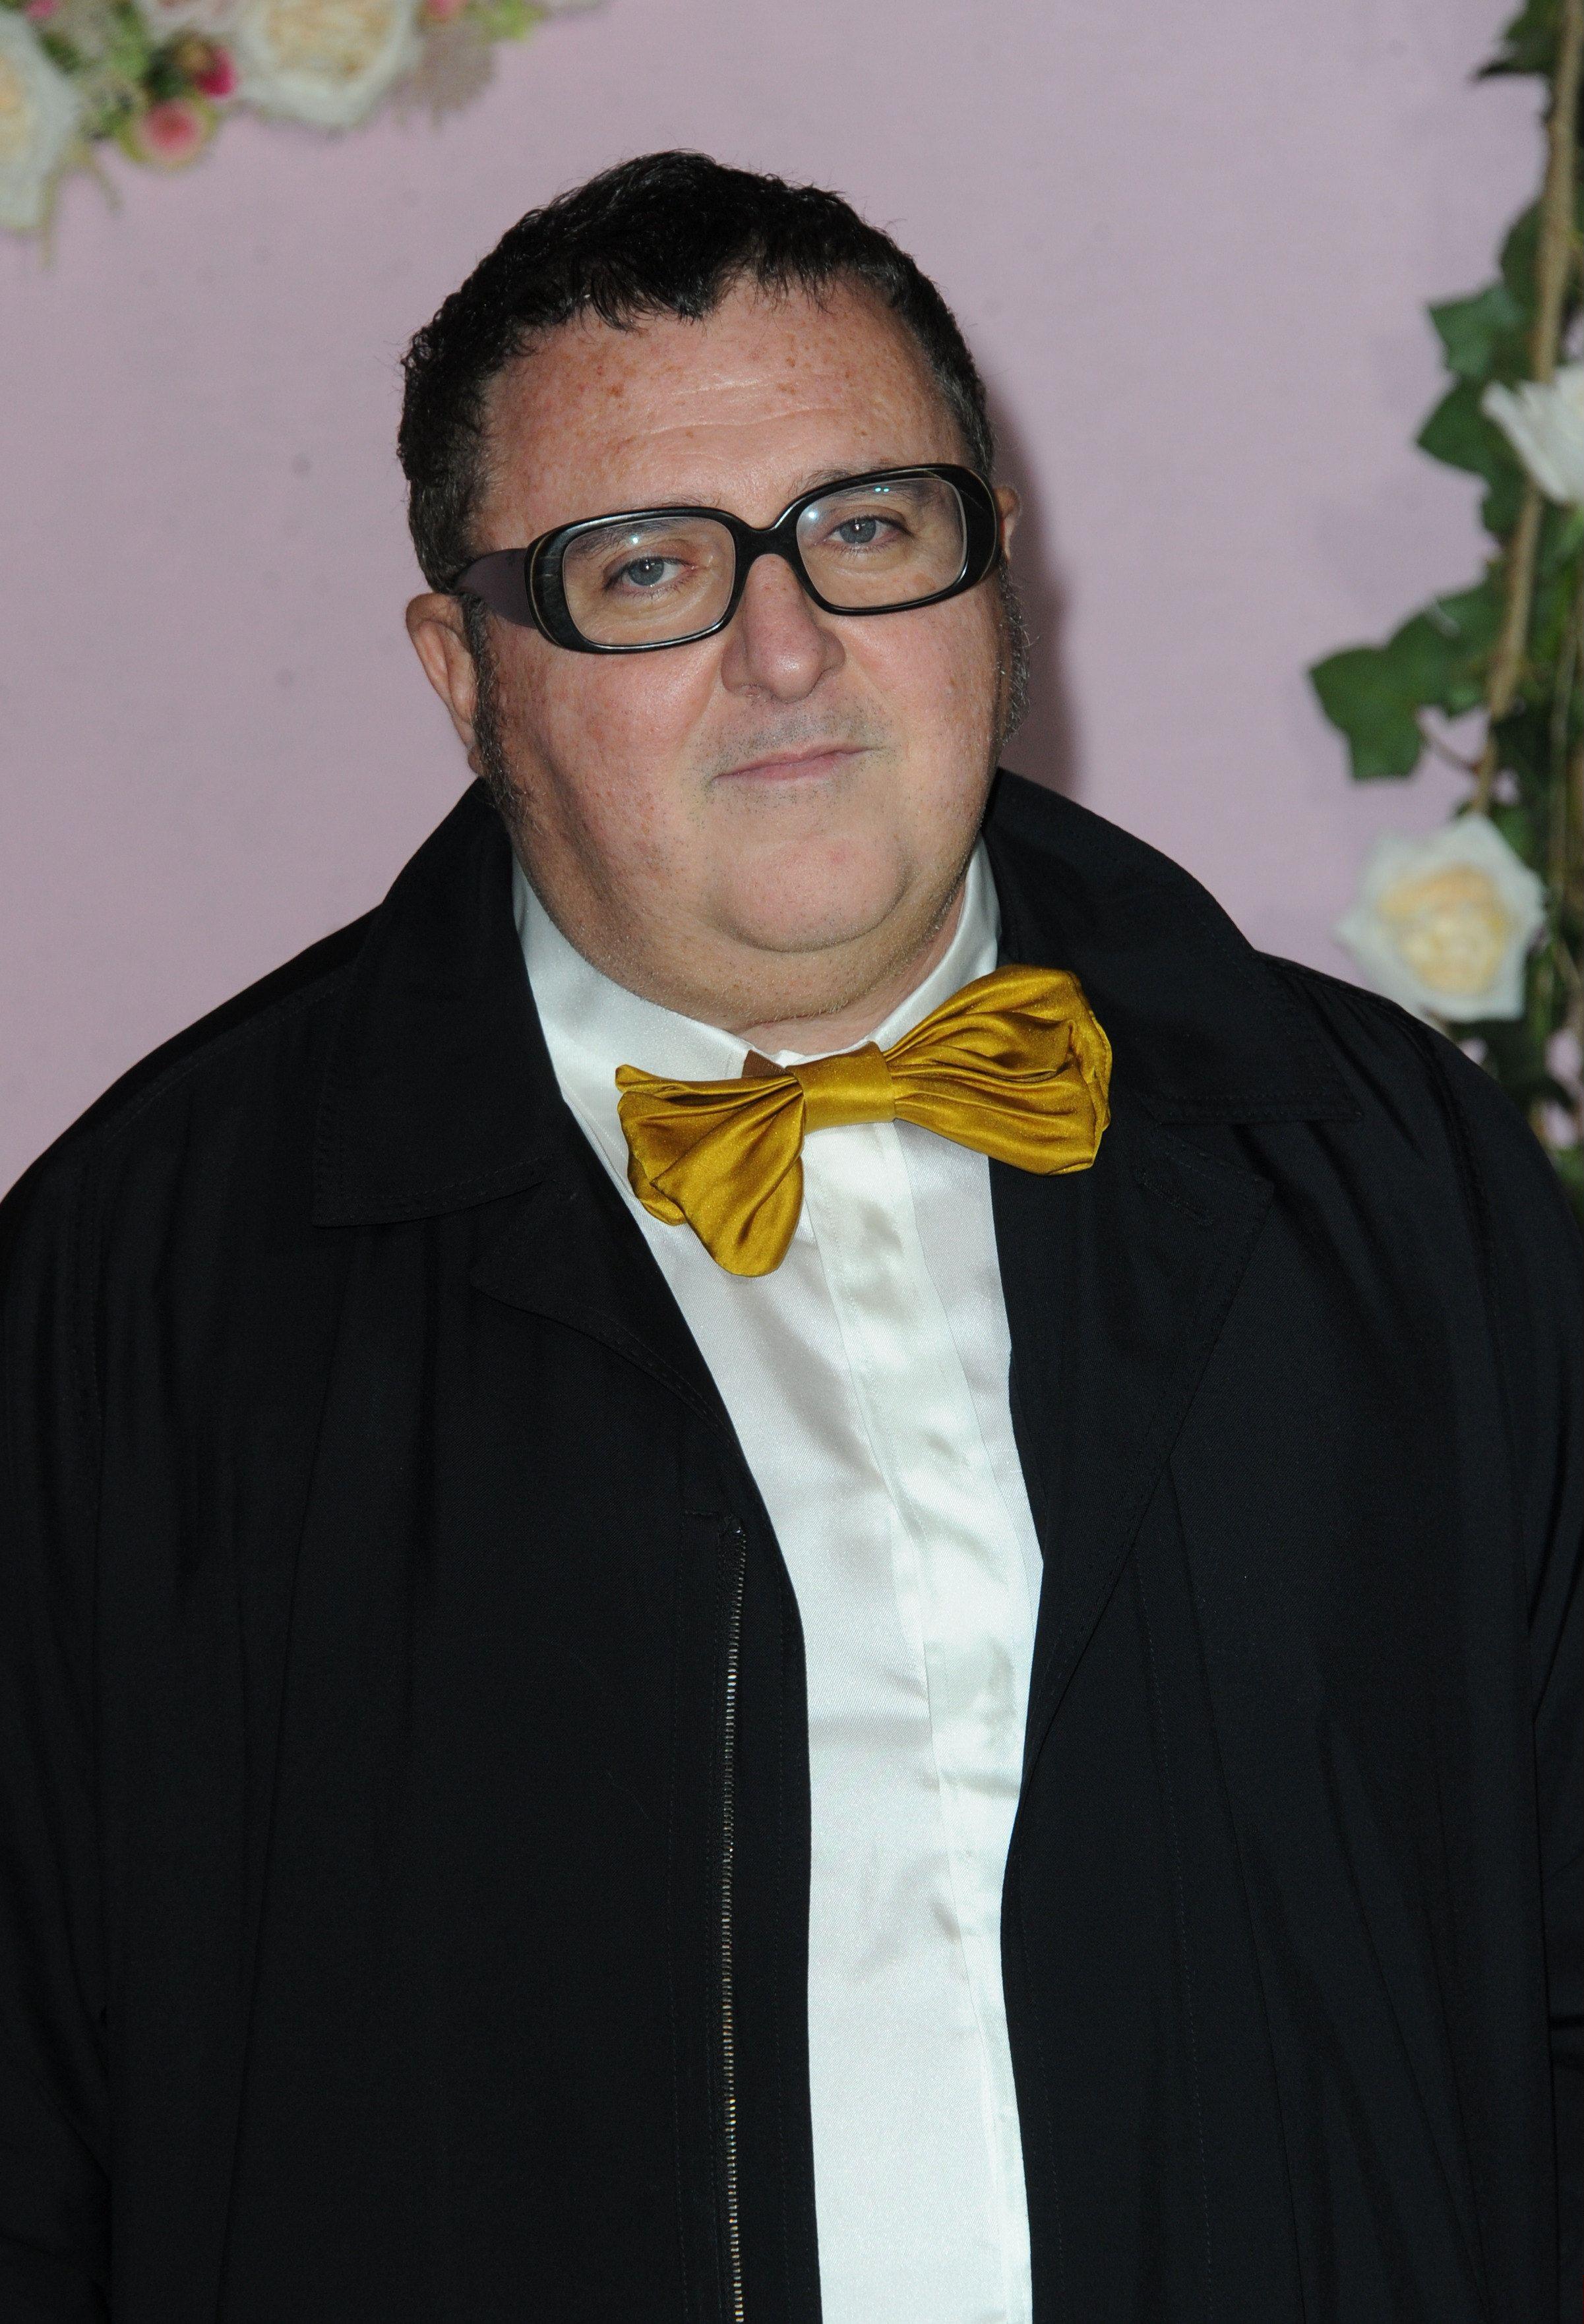 <p>Fashion designer Alber Elbaz died from complications of COVID-19 in Paris on April 24, 2021. He was 59. The company behind the Moroccan-born Israeli designer's latest venture, AZ Factory, confirmed the sad news to The New York Times. The man whose work was worn by celebrity clients including Beyonce, Natalie Portman, Harry Styles, Meryl Streep and more most notably served as the fashion director for Lanvin from 2001 to 2015.</p>